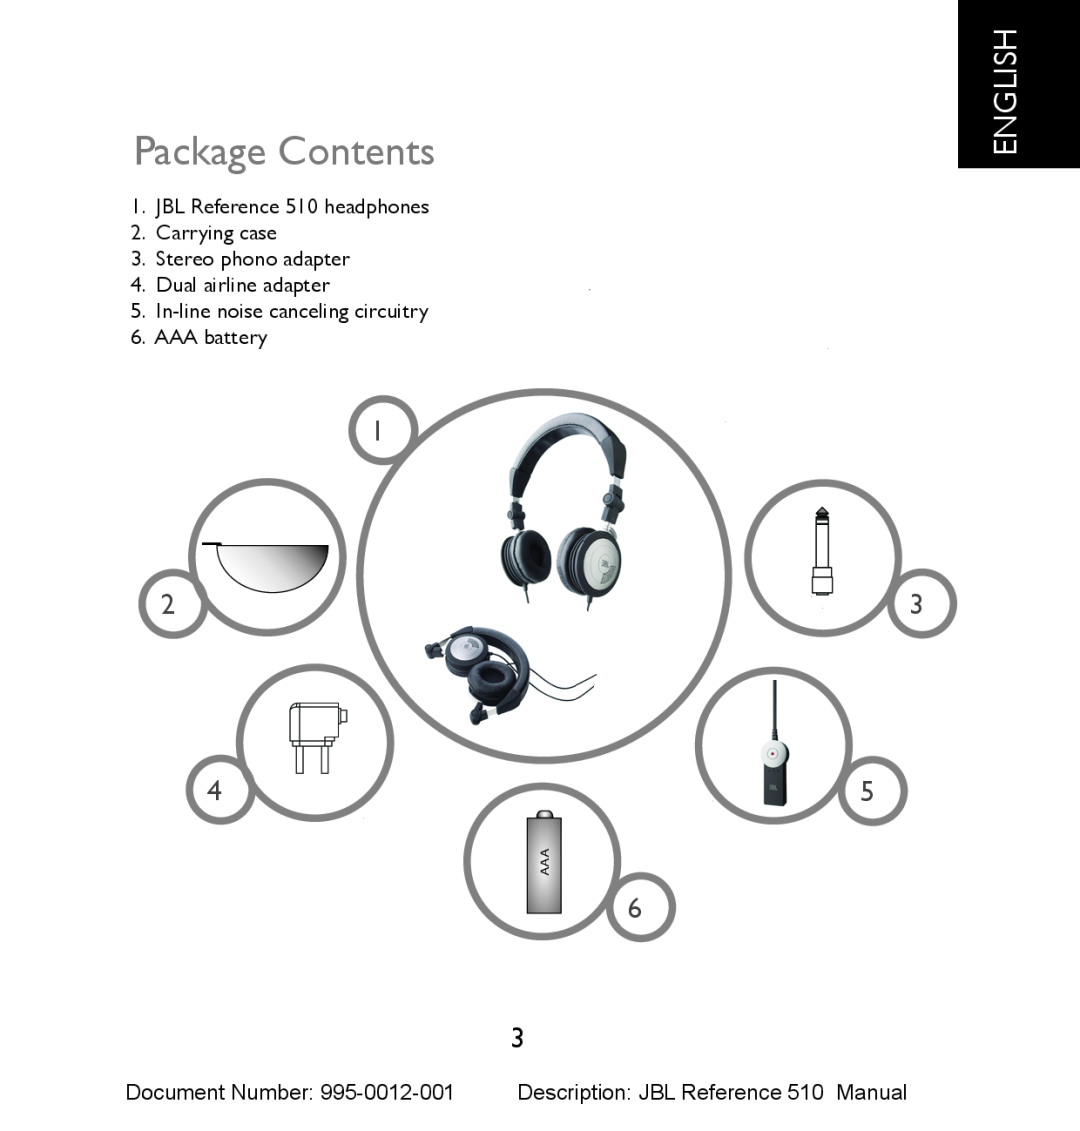 JBL 510 manual Package Contents, English 